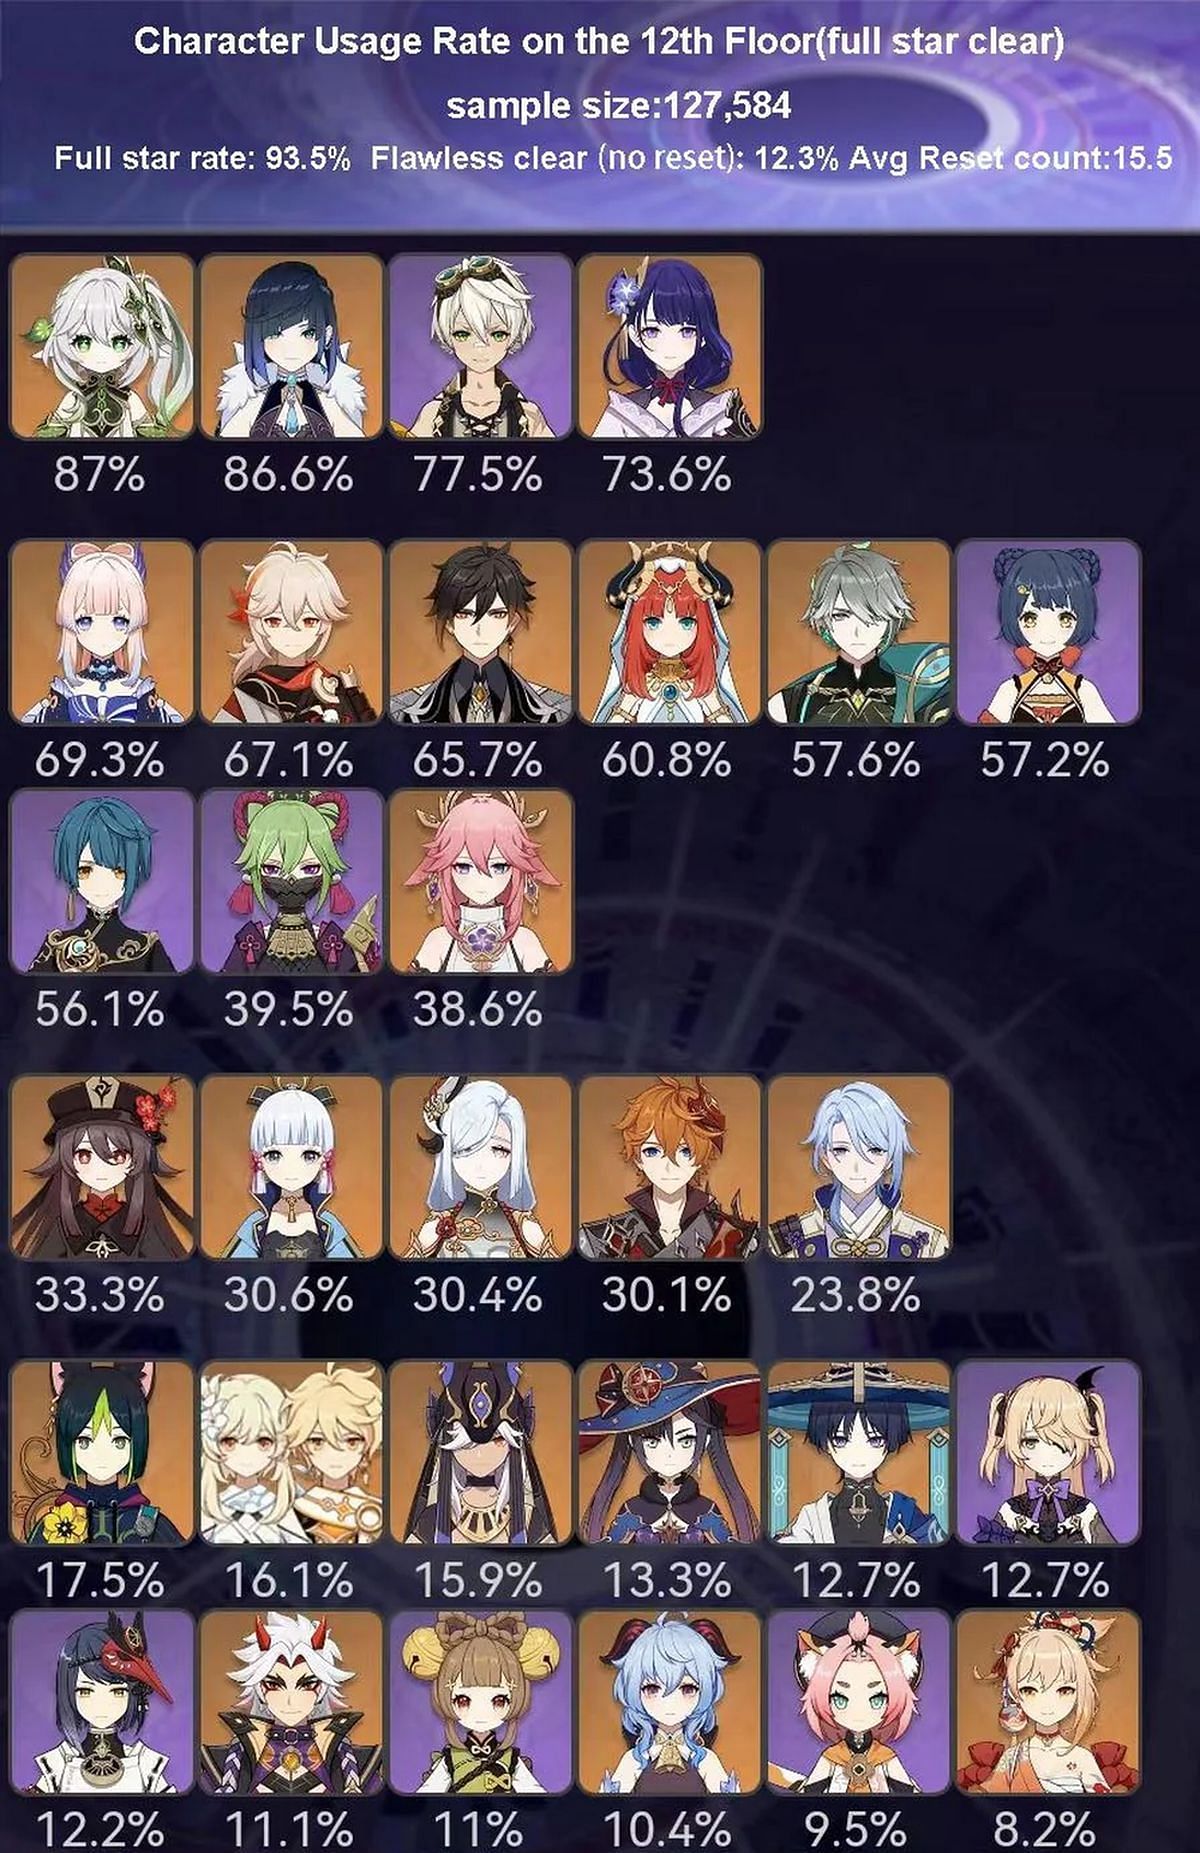 This infographic contains data for character usage rate (Image via u/hammy851)